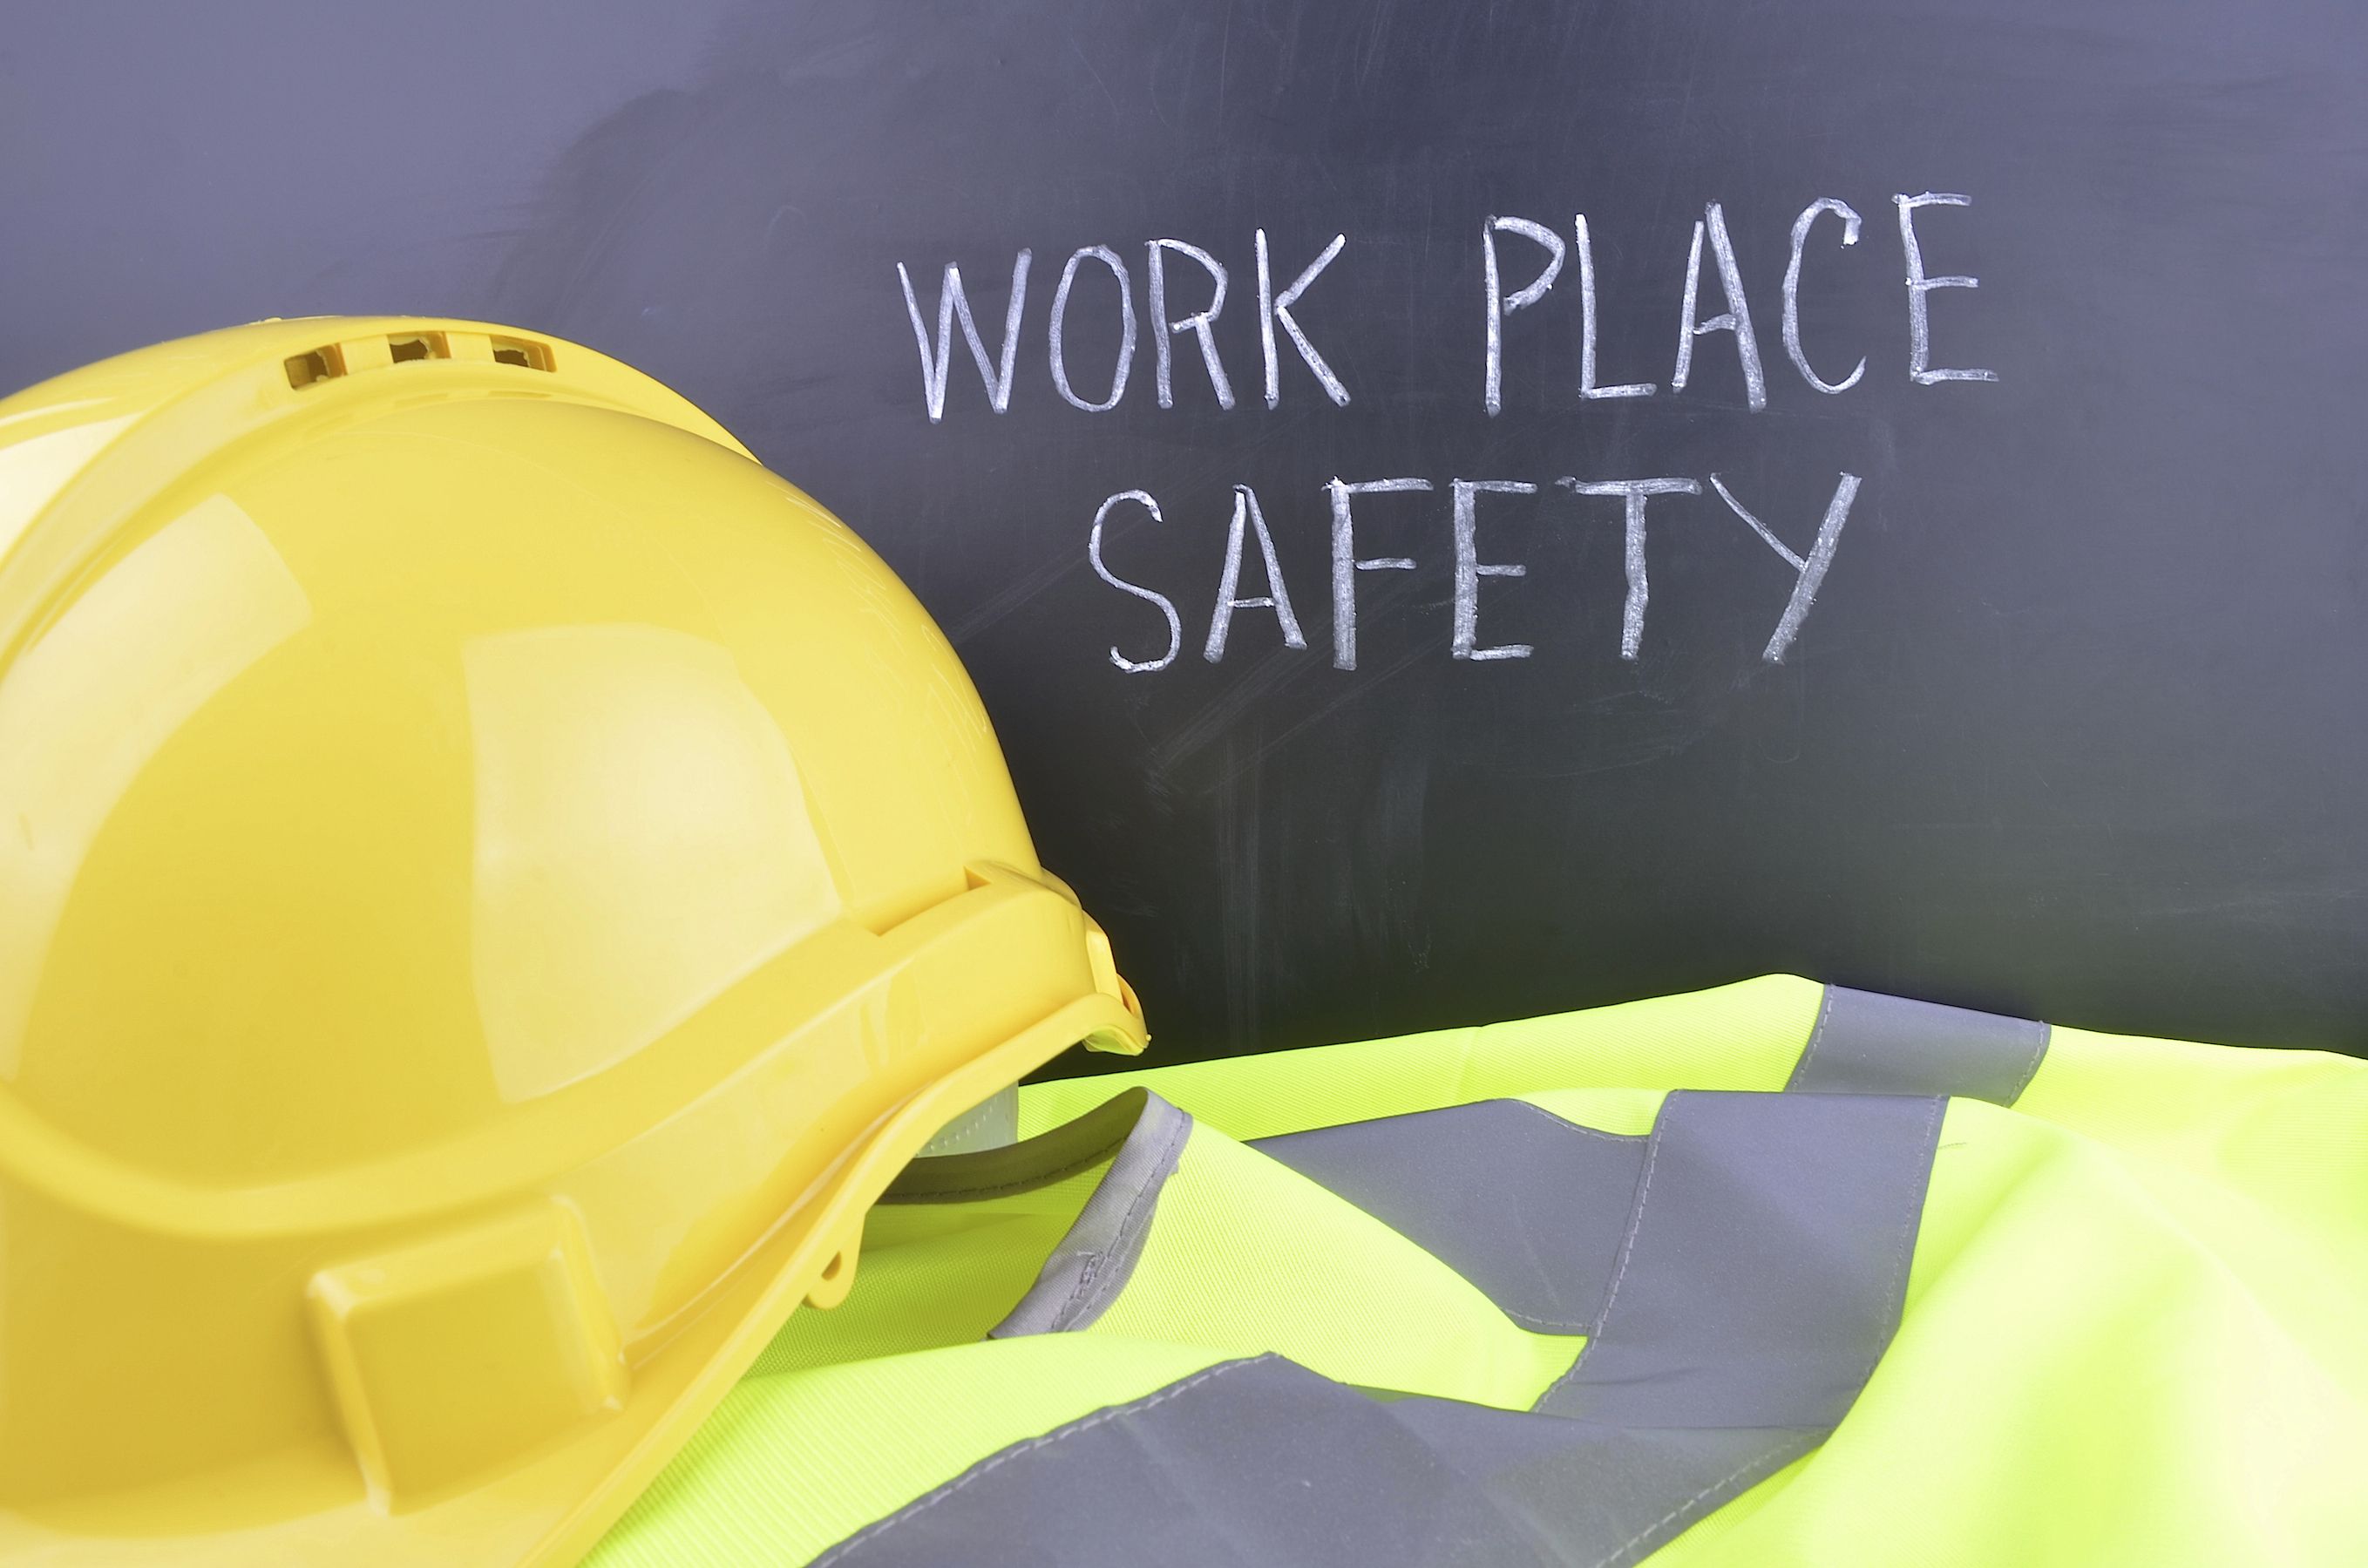 OSHA Releases Two More Temporary Worker Guidance Documents. Workplace Safety and Environmental Law Alert Blog